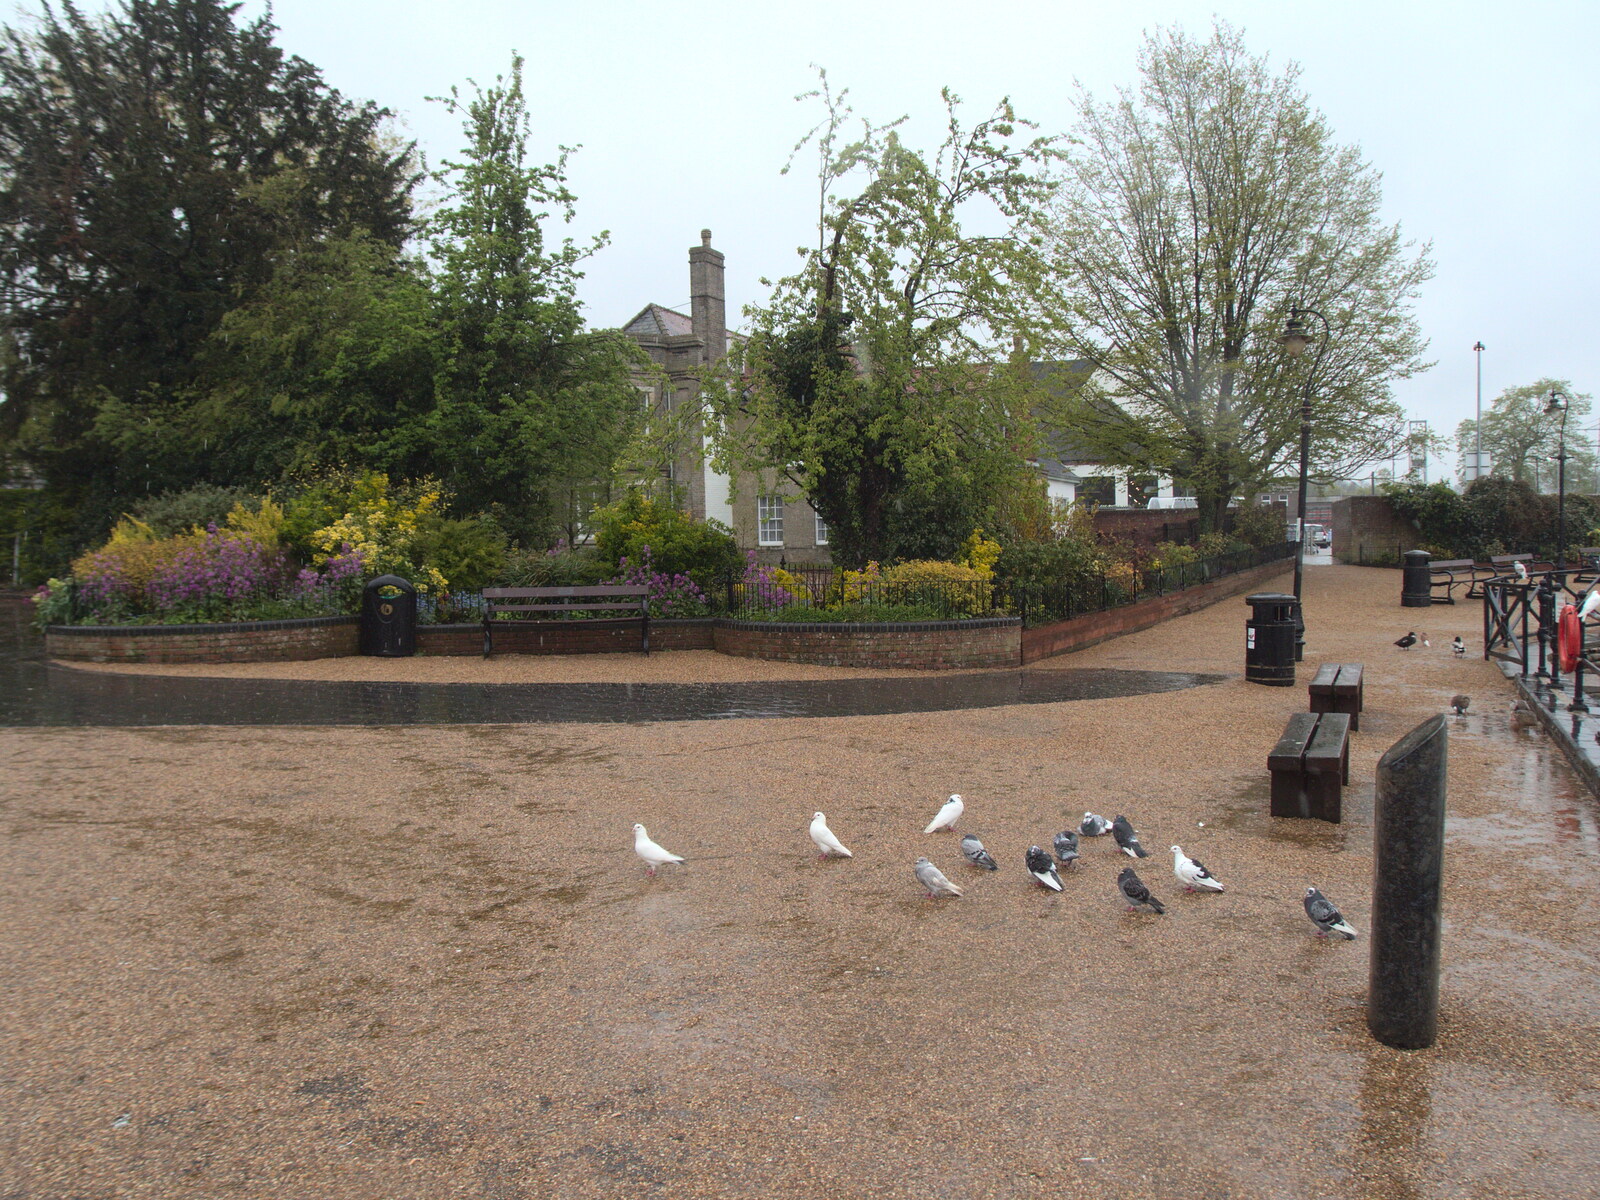 A small huddle of pigeons near the Mere from A Vaccination Afternoon, Swaffham, Norfolk - 9th May 2021